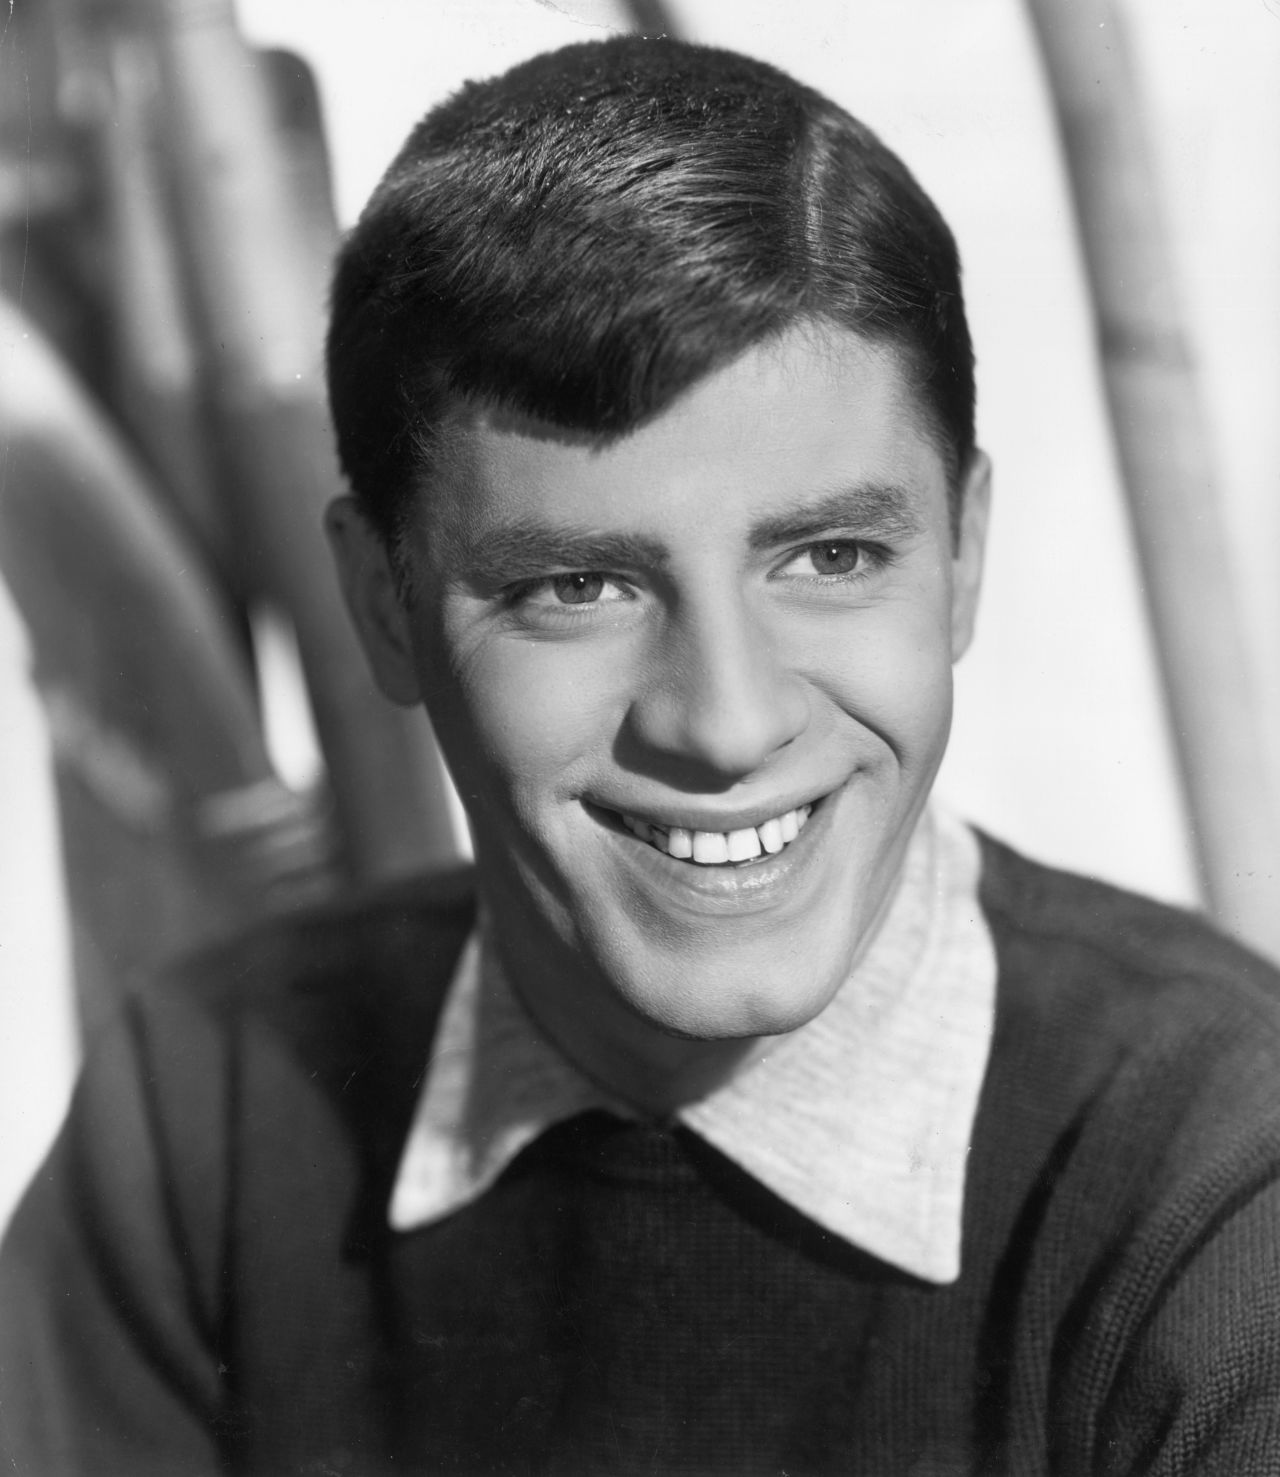 <a href="http://www.cnn.com/2017/08/20/entertainment/jerry-lewis-dies/index.html?adkey=bn" target="_blank">Jerry Lewis</a>, the slapstick-loving comedian, innovative filmmaker and generous fundraiser, died August 20 after a brief illness. He was 91.